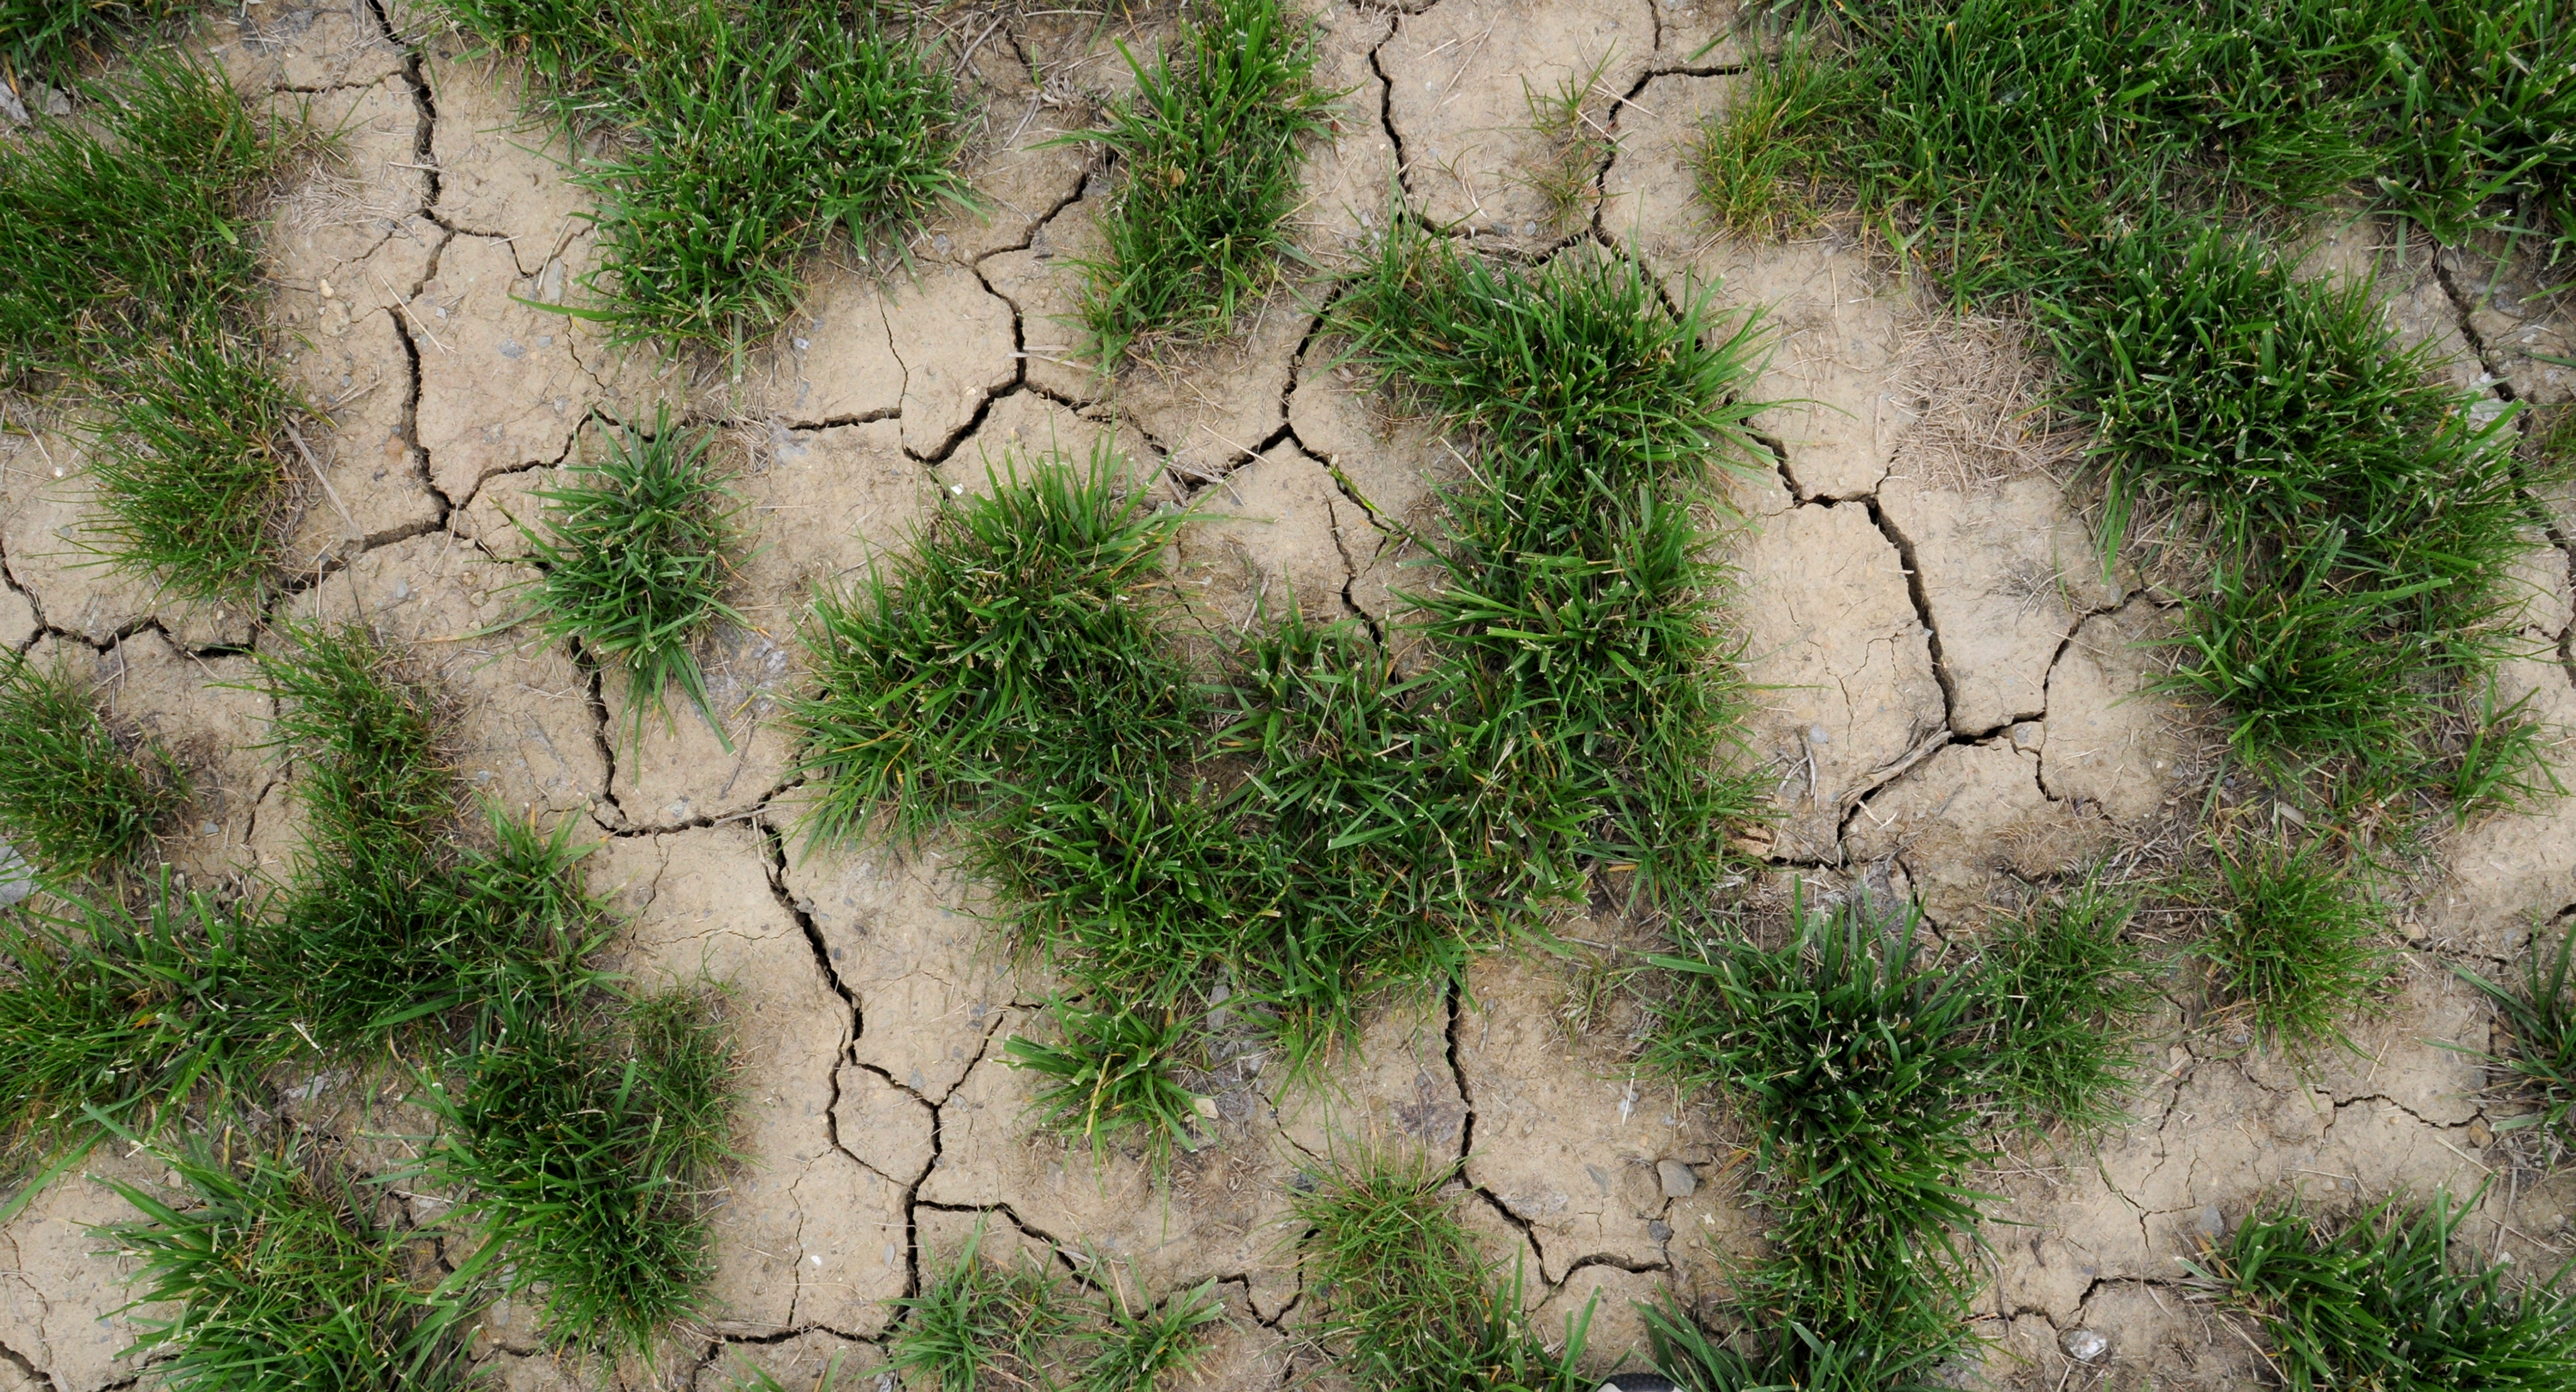 Dry soil and grass, caused by drought.